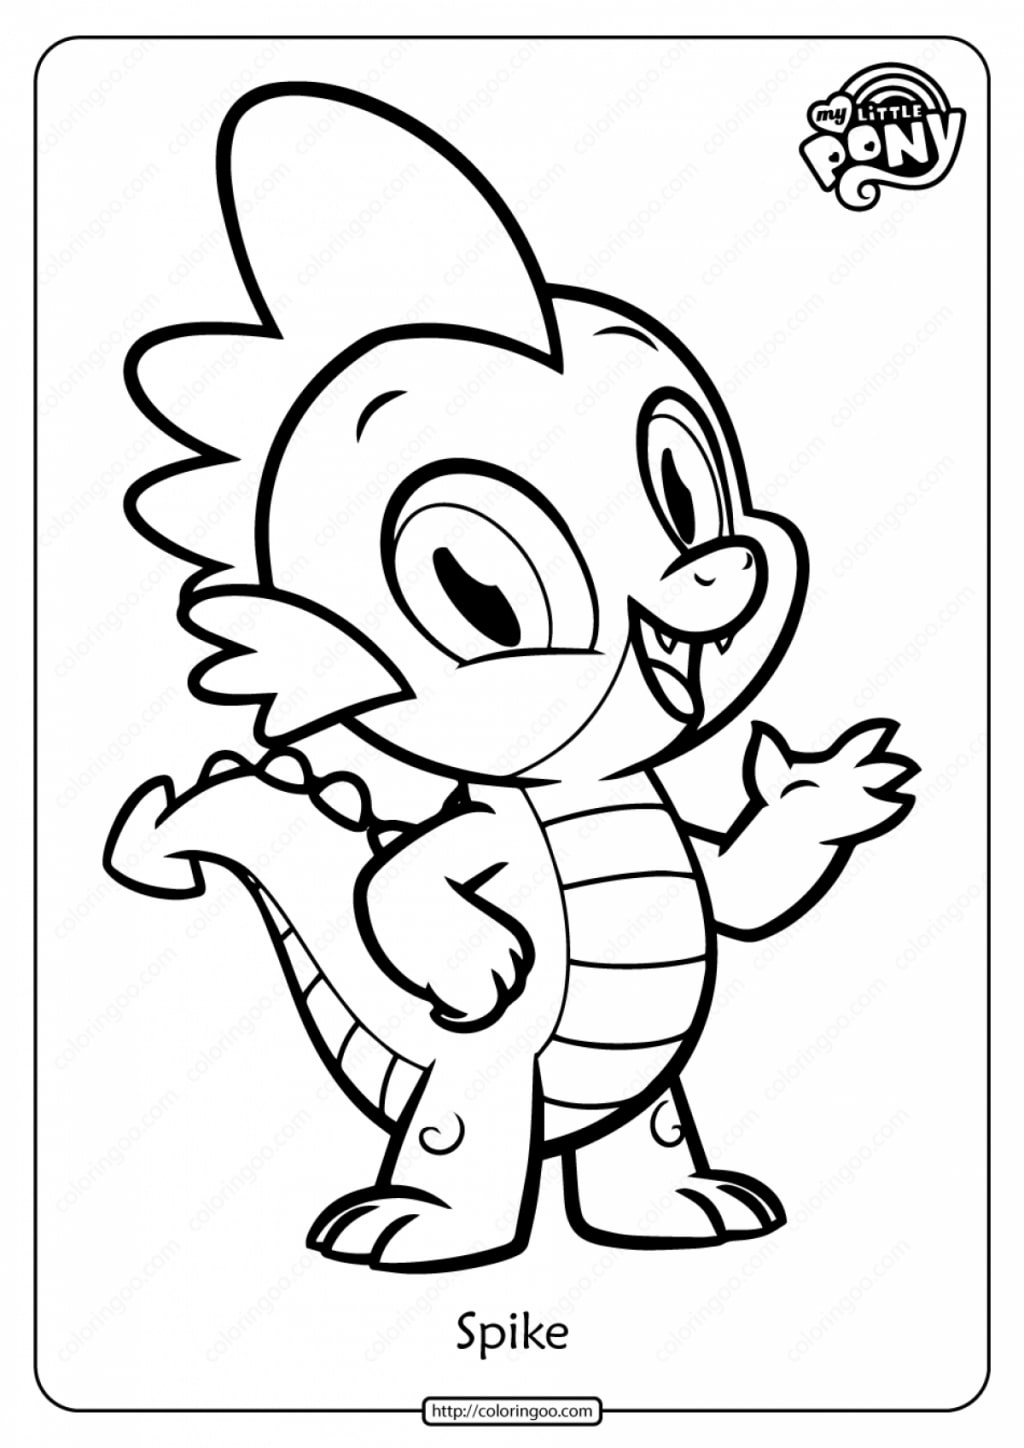 Spike Coloring Pages